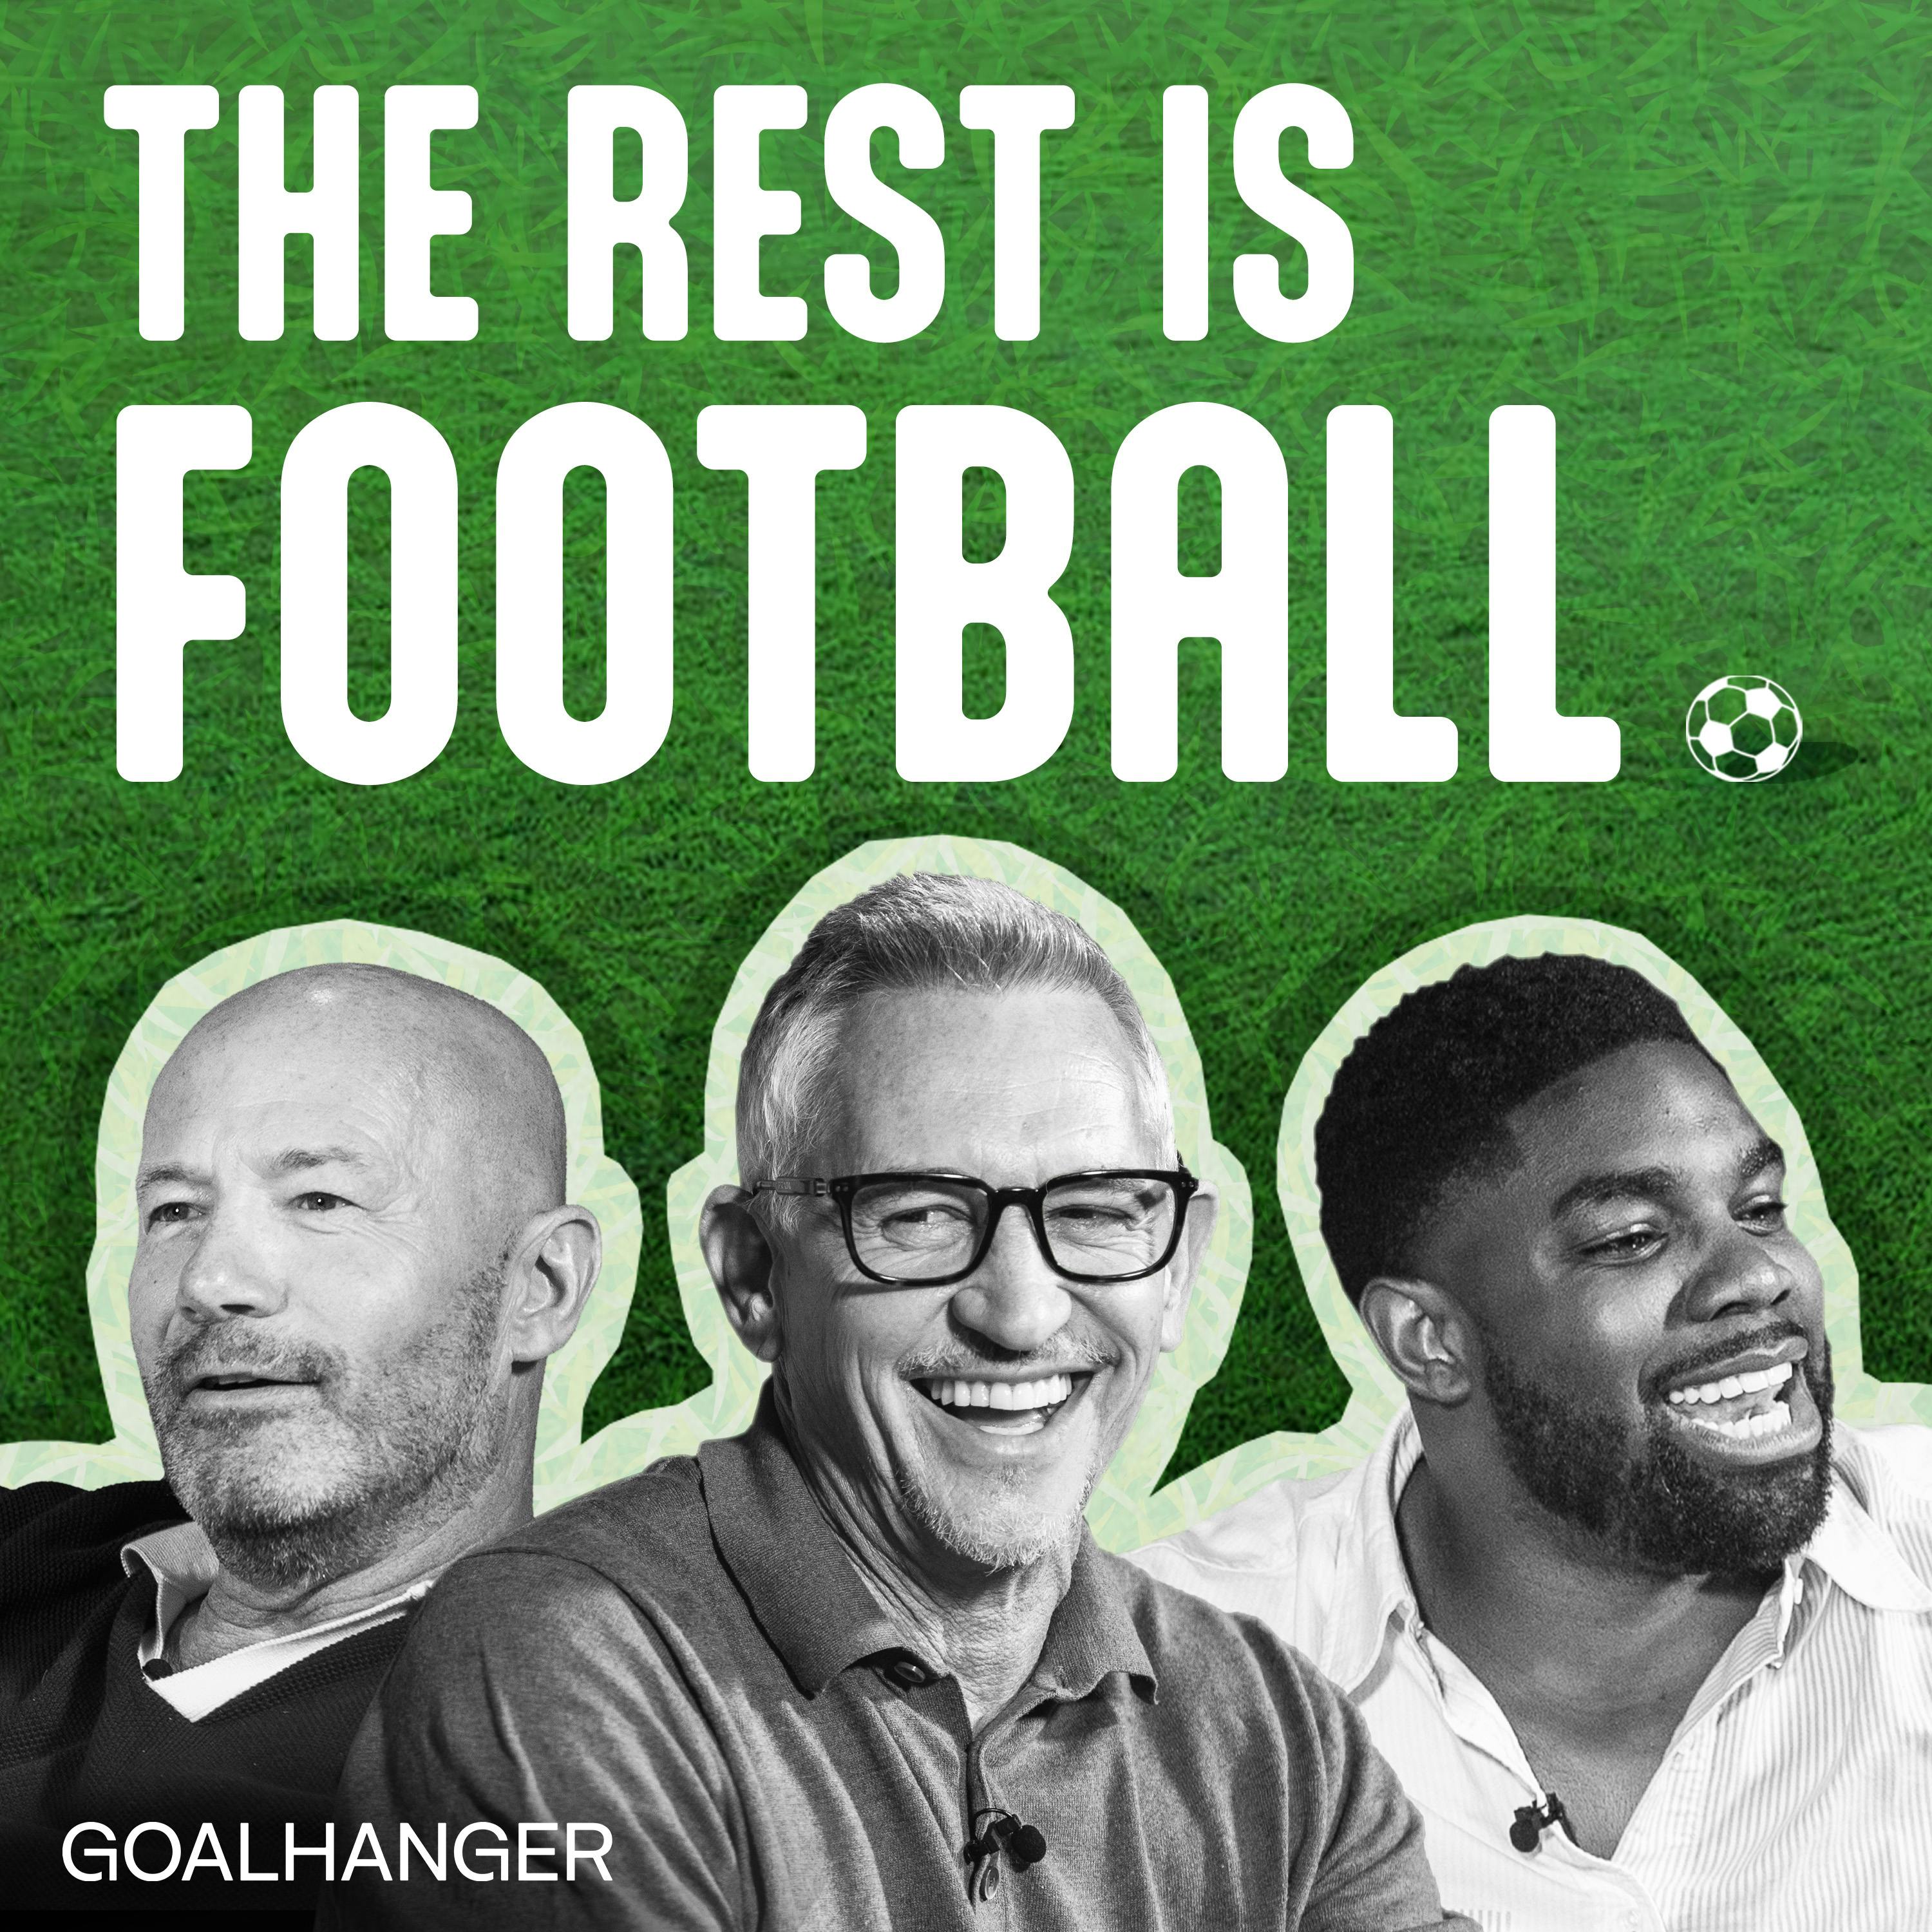 NEW PODCAST: THE REST IS FOOTBALL